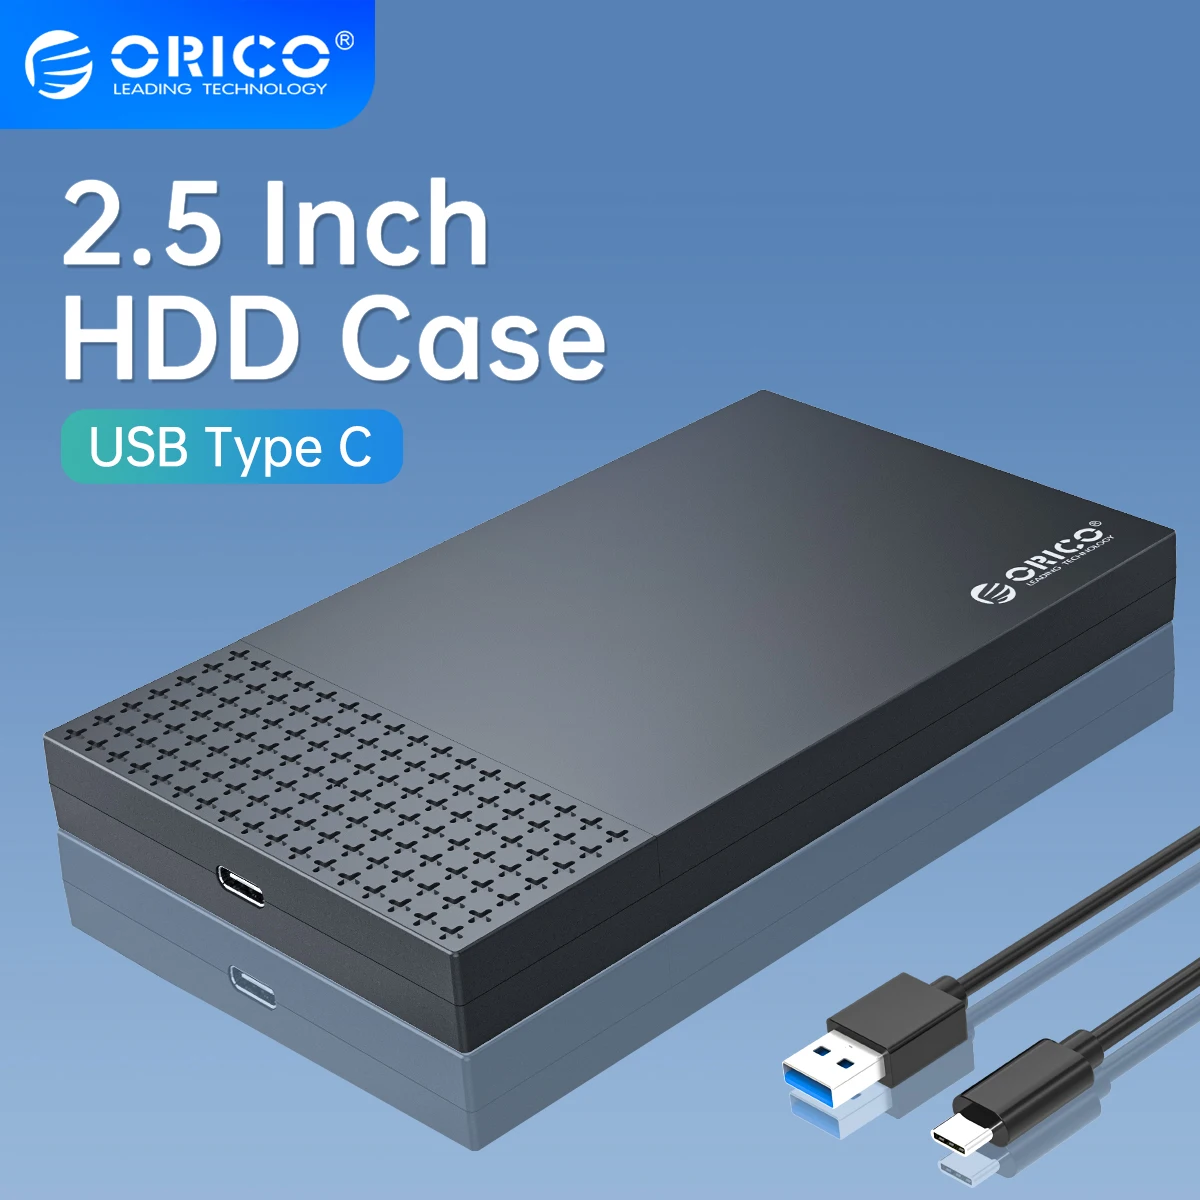 Orico 2.5 Inch Hdd Case Type C External Hard Drive Case Sata To Usb 3.1 Hdd  Enclosure Box For Sata Hdd Ssd Case Support Uasp - Hdd  Ssd Enclosure -  AliExpress